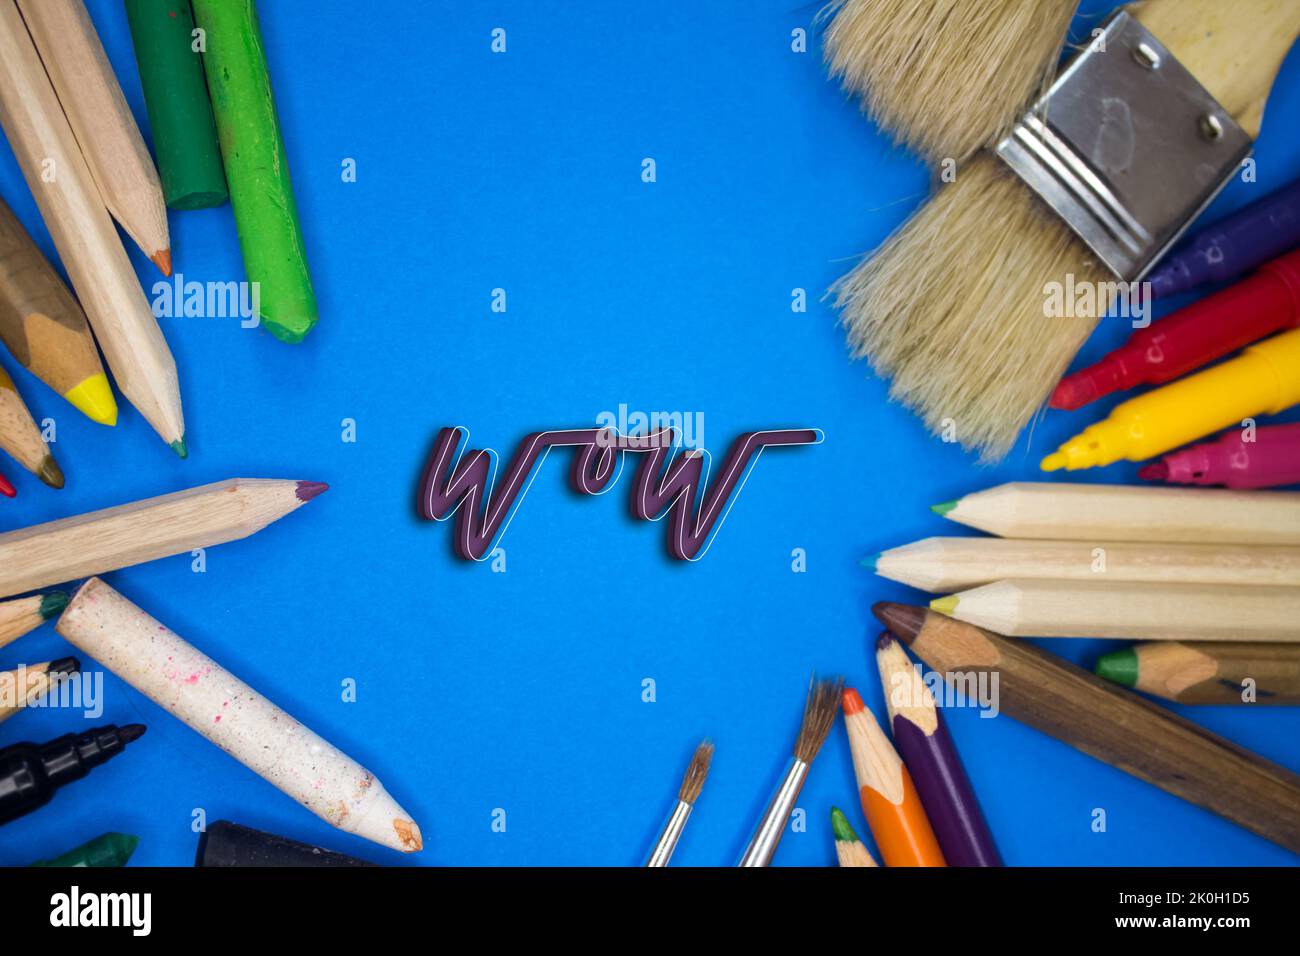 Overhead shot of school supplies with Wow text. Brushes, pencils, artistic tools. Art And Craft Work Tools. Stock Photo